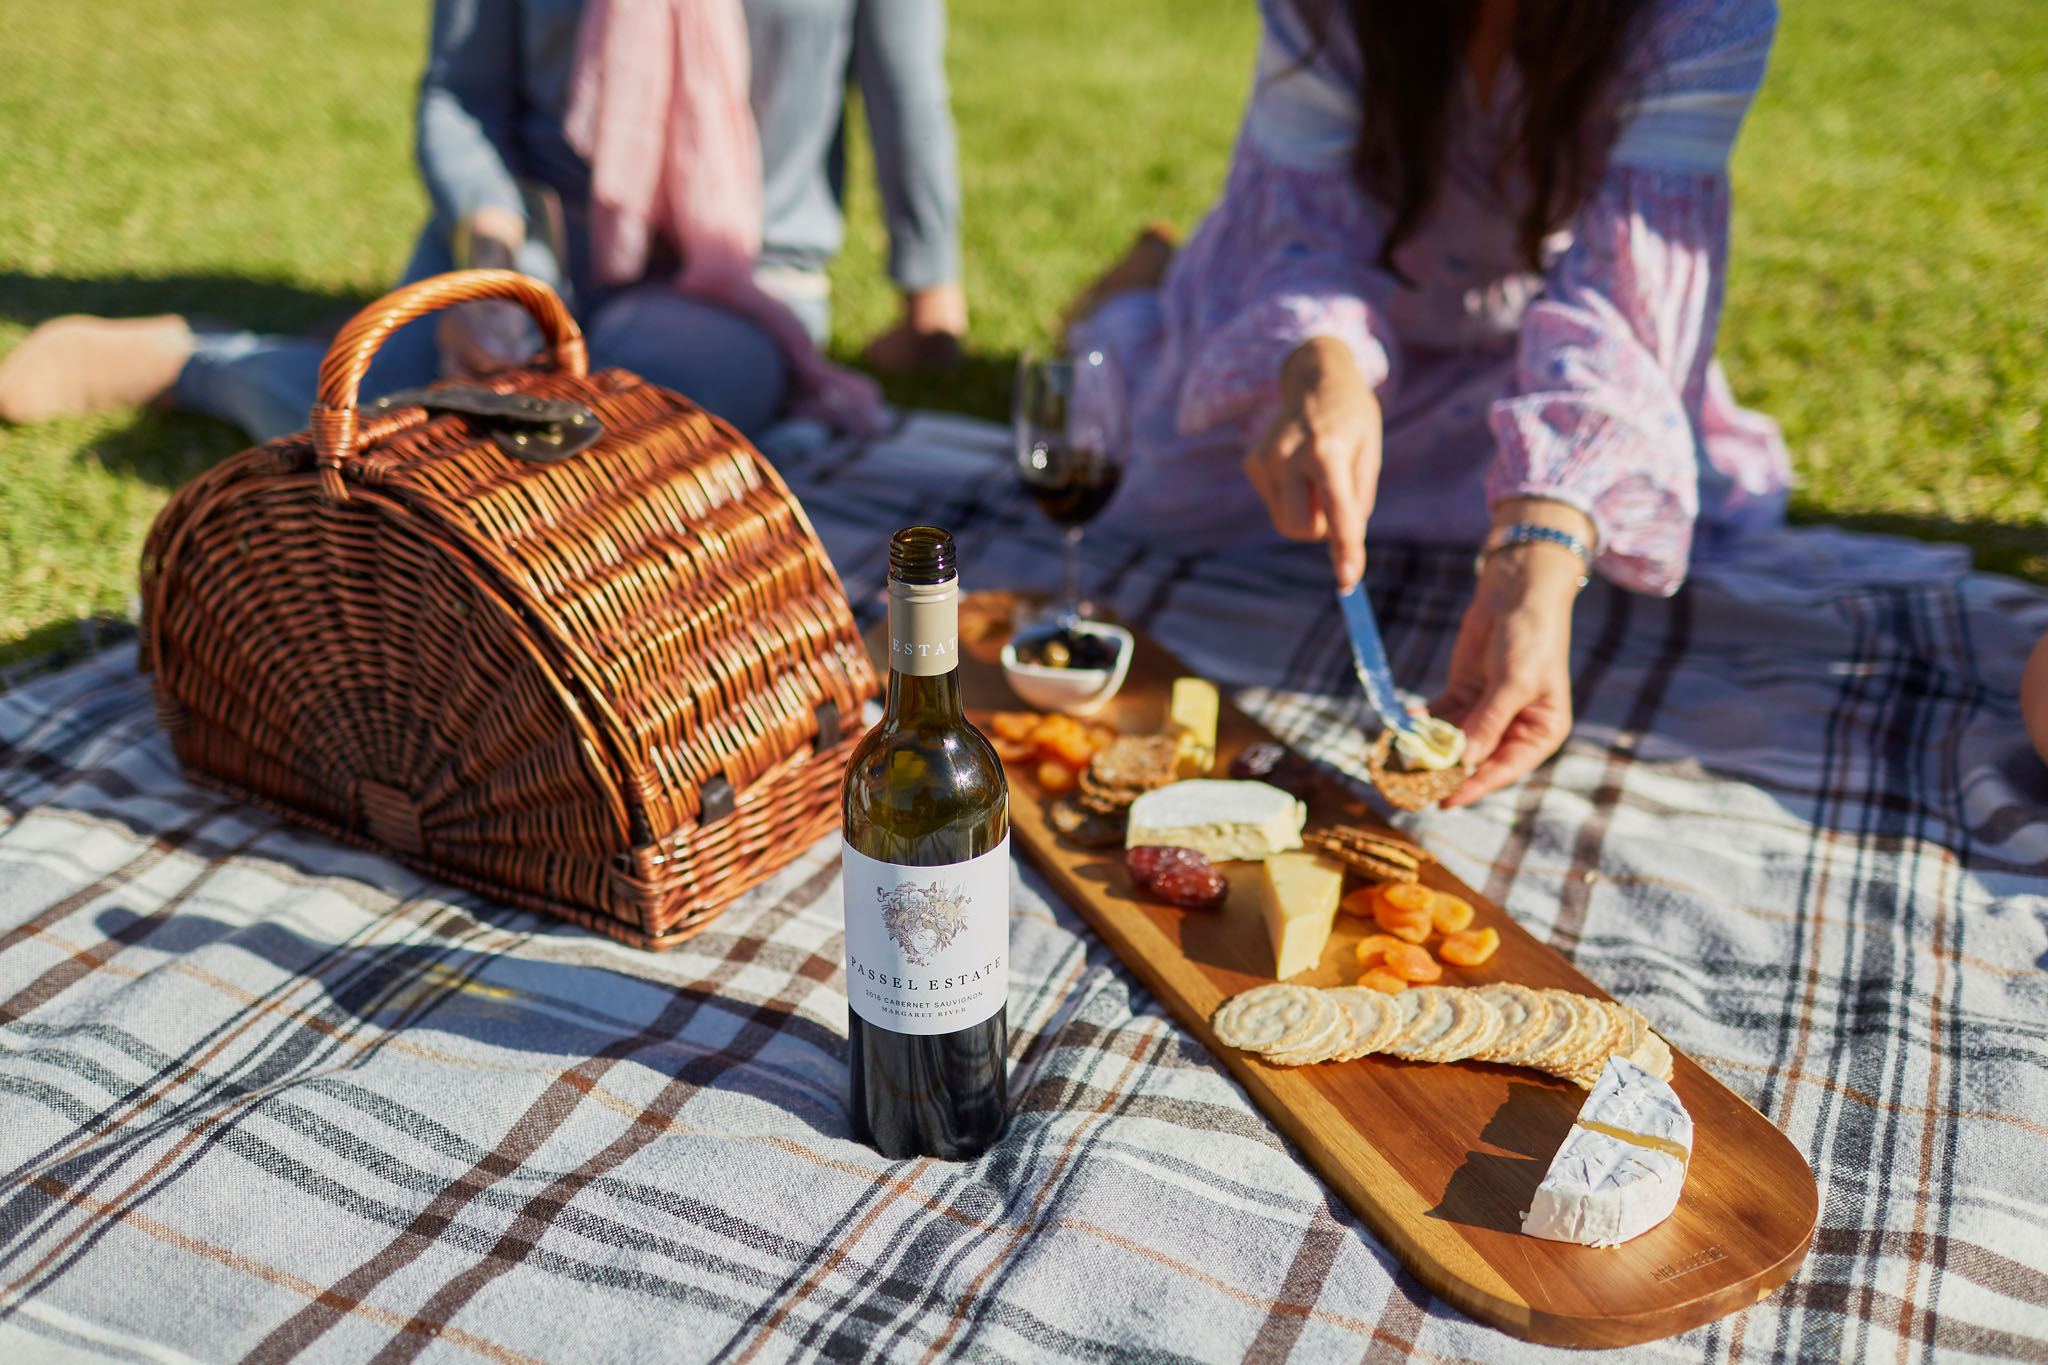 Cheeseboard and wine on the lawn at Passel Estate. Credit Tim Campbell.